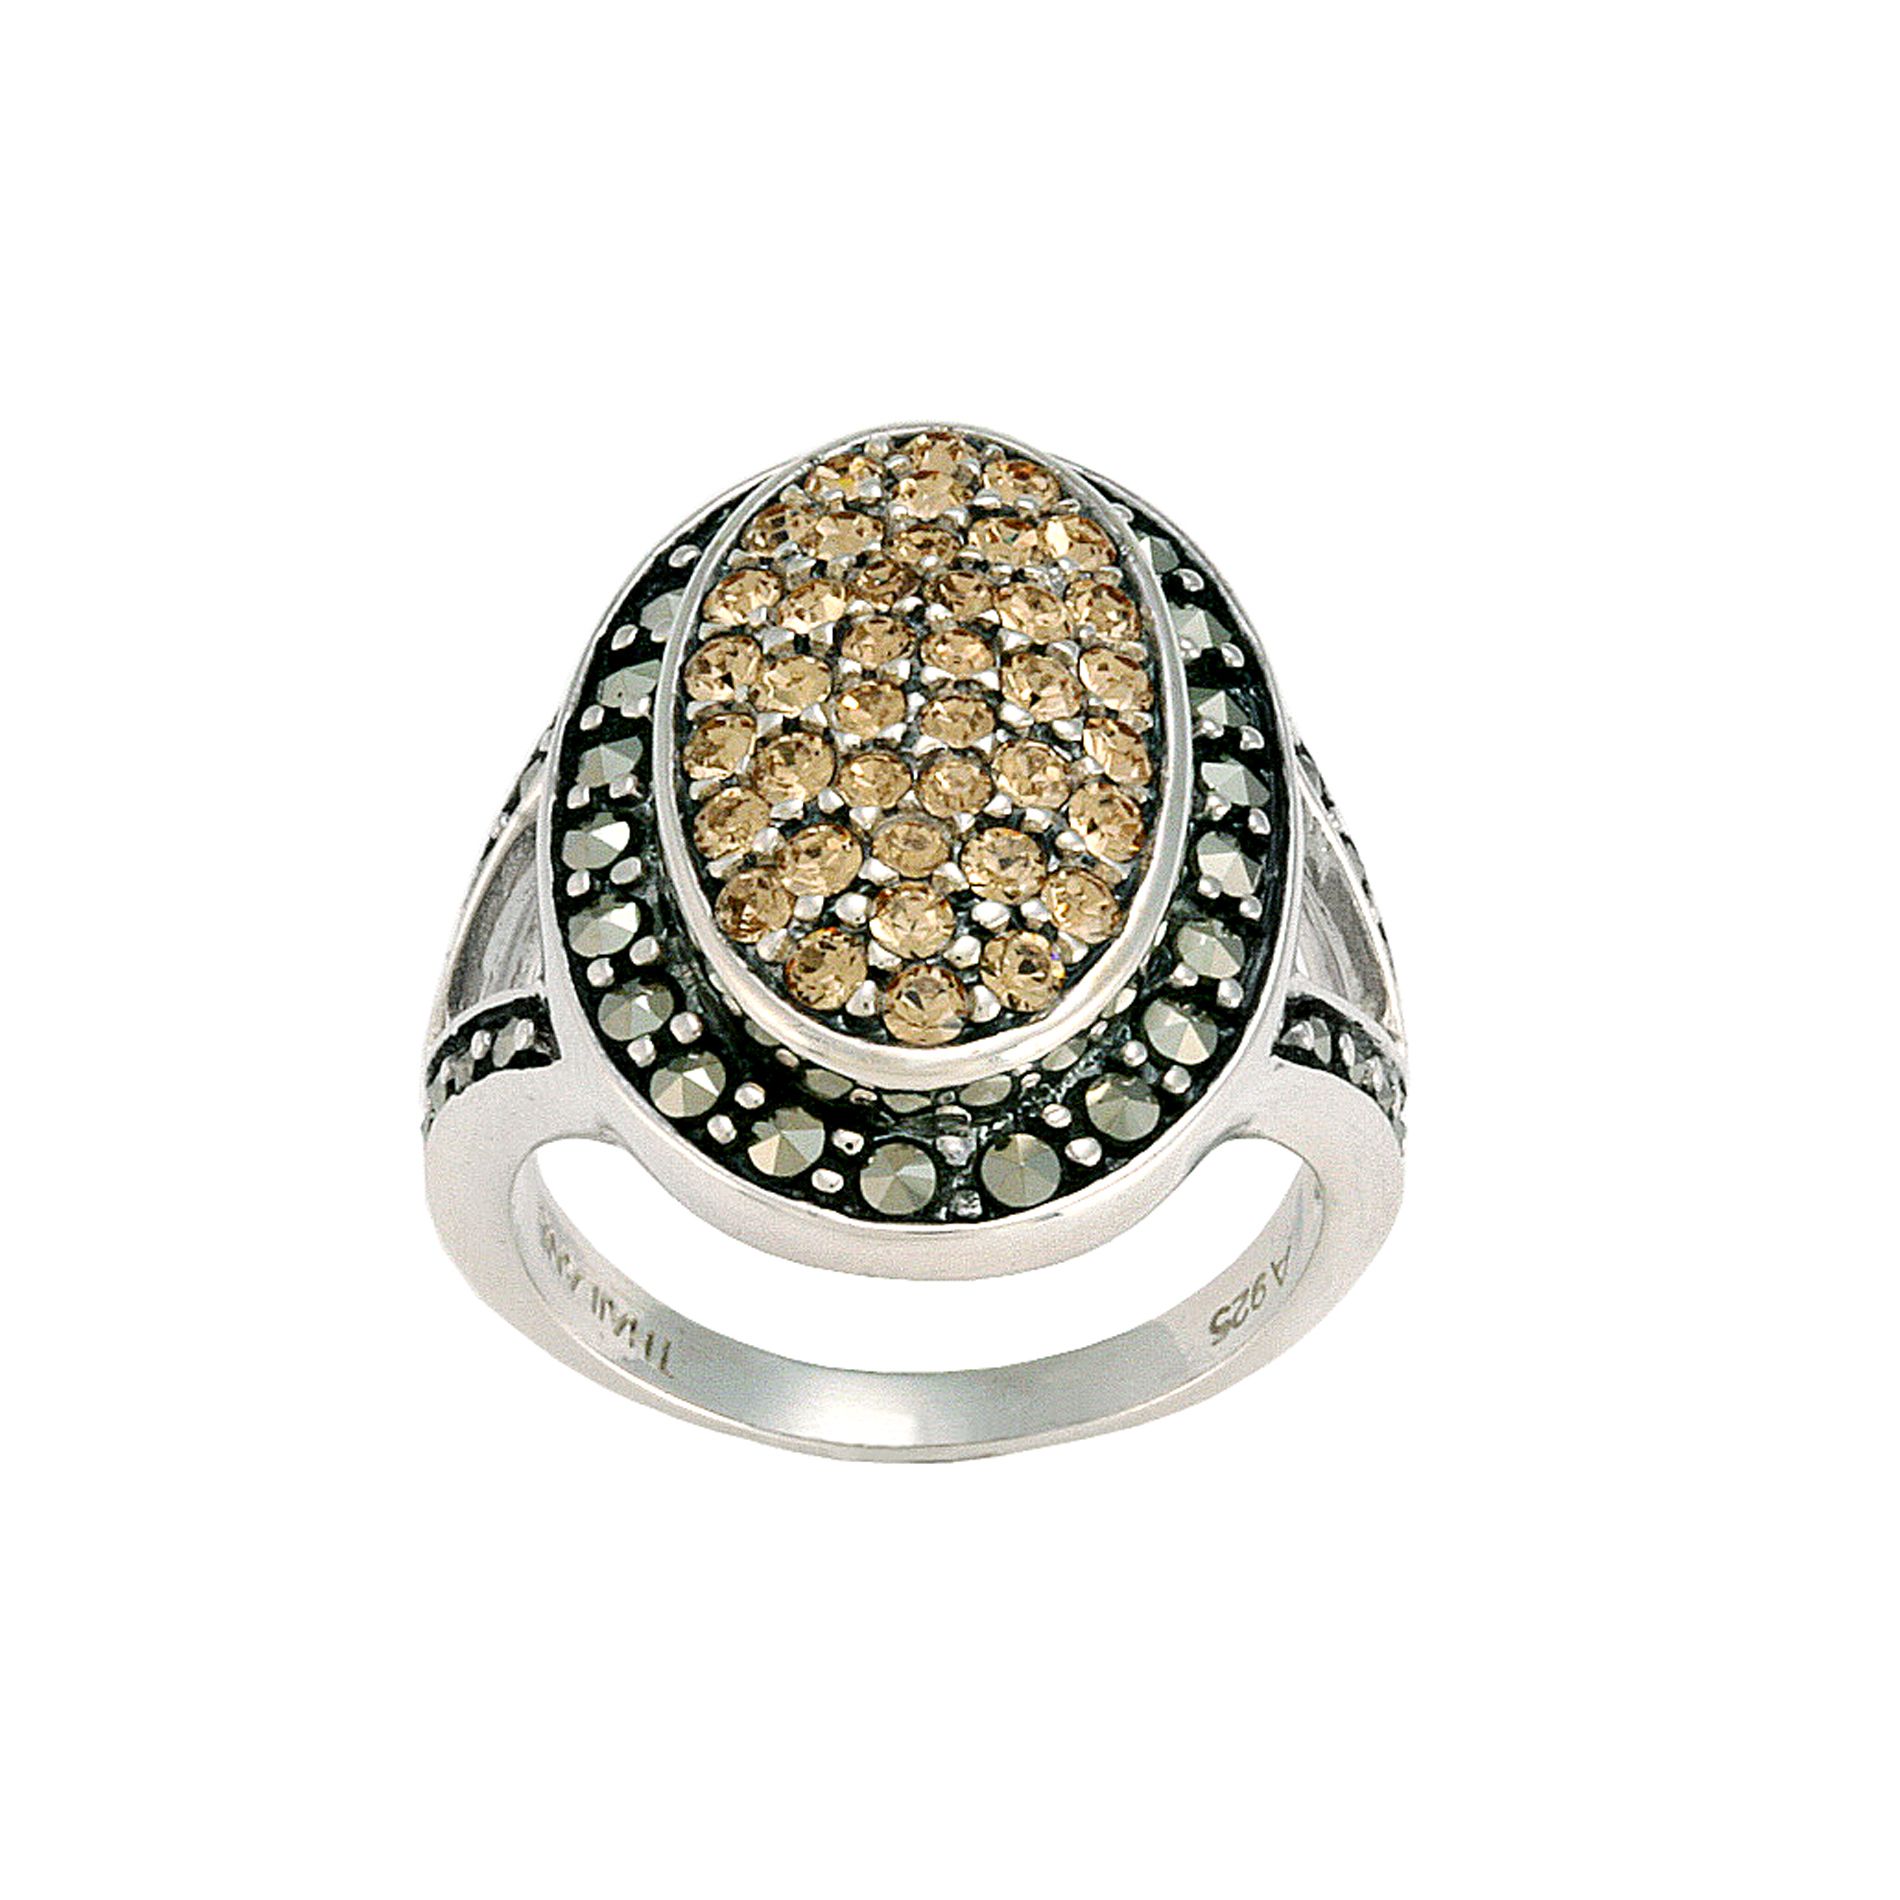 Marcasite Pave and Champagne Crystal Oval Ring. Sterling Silver